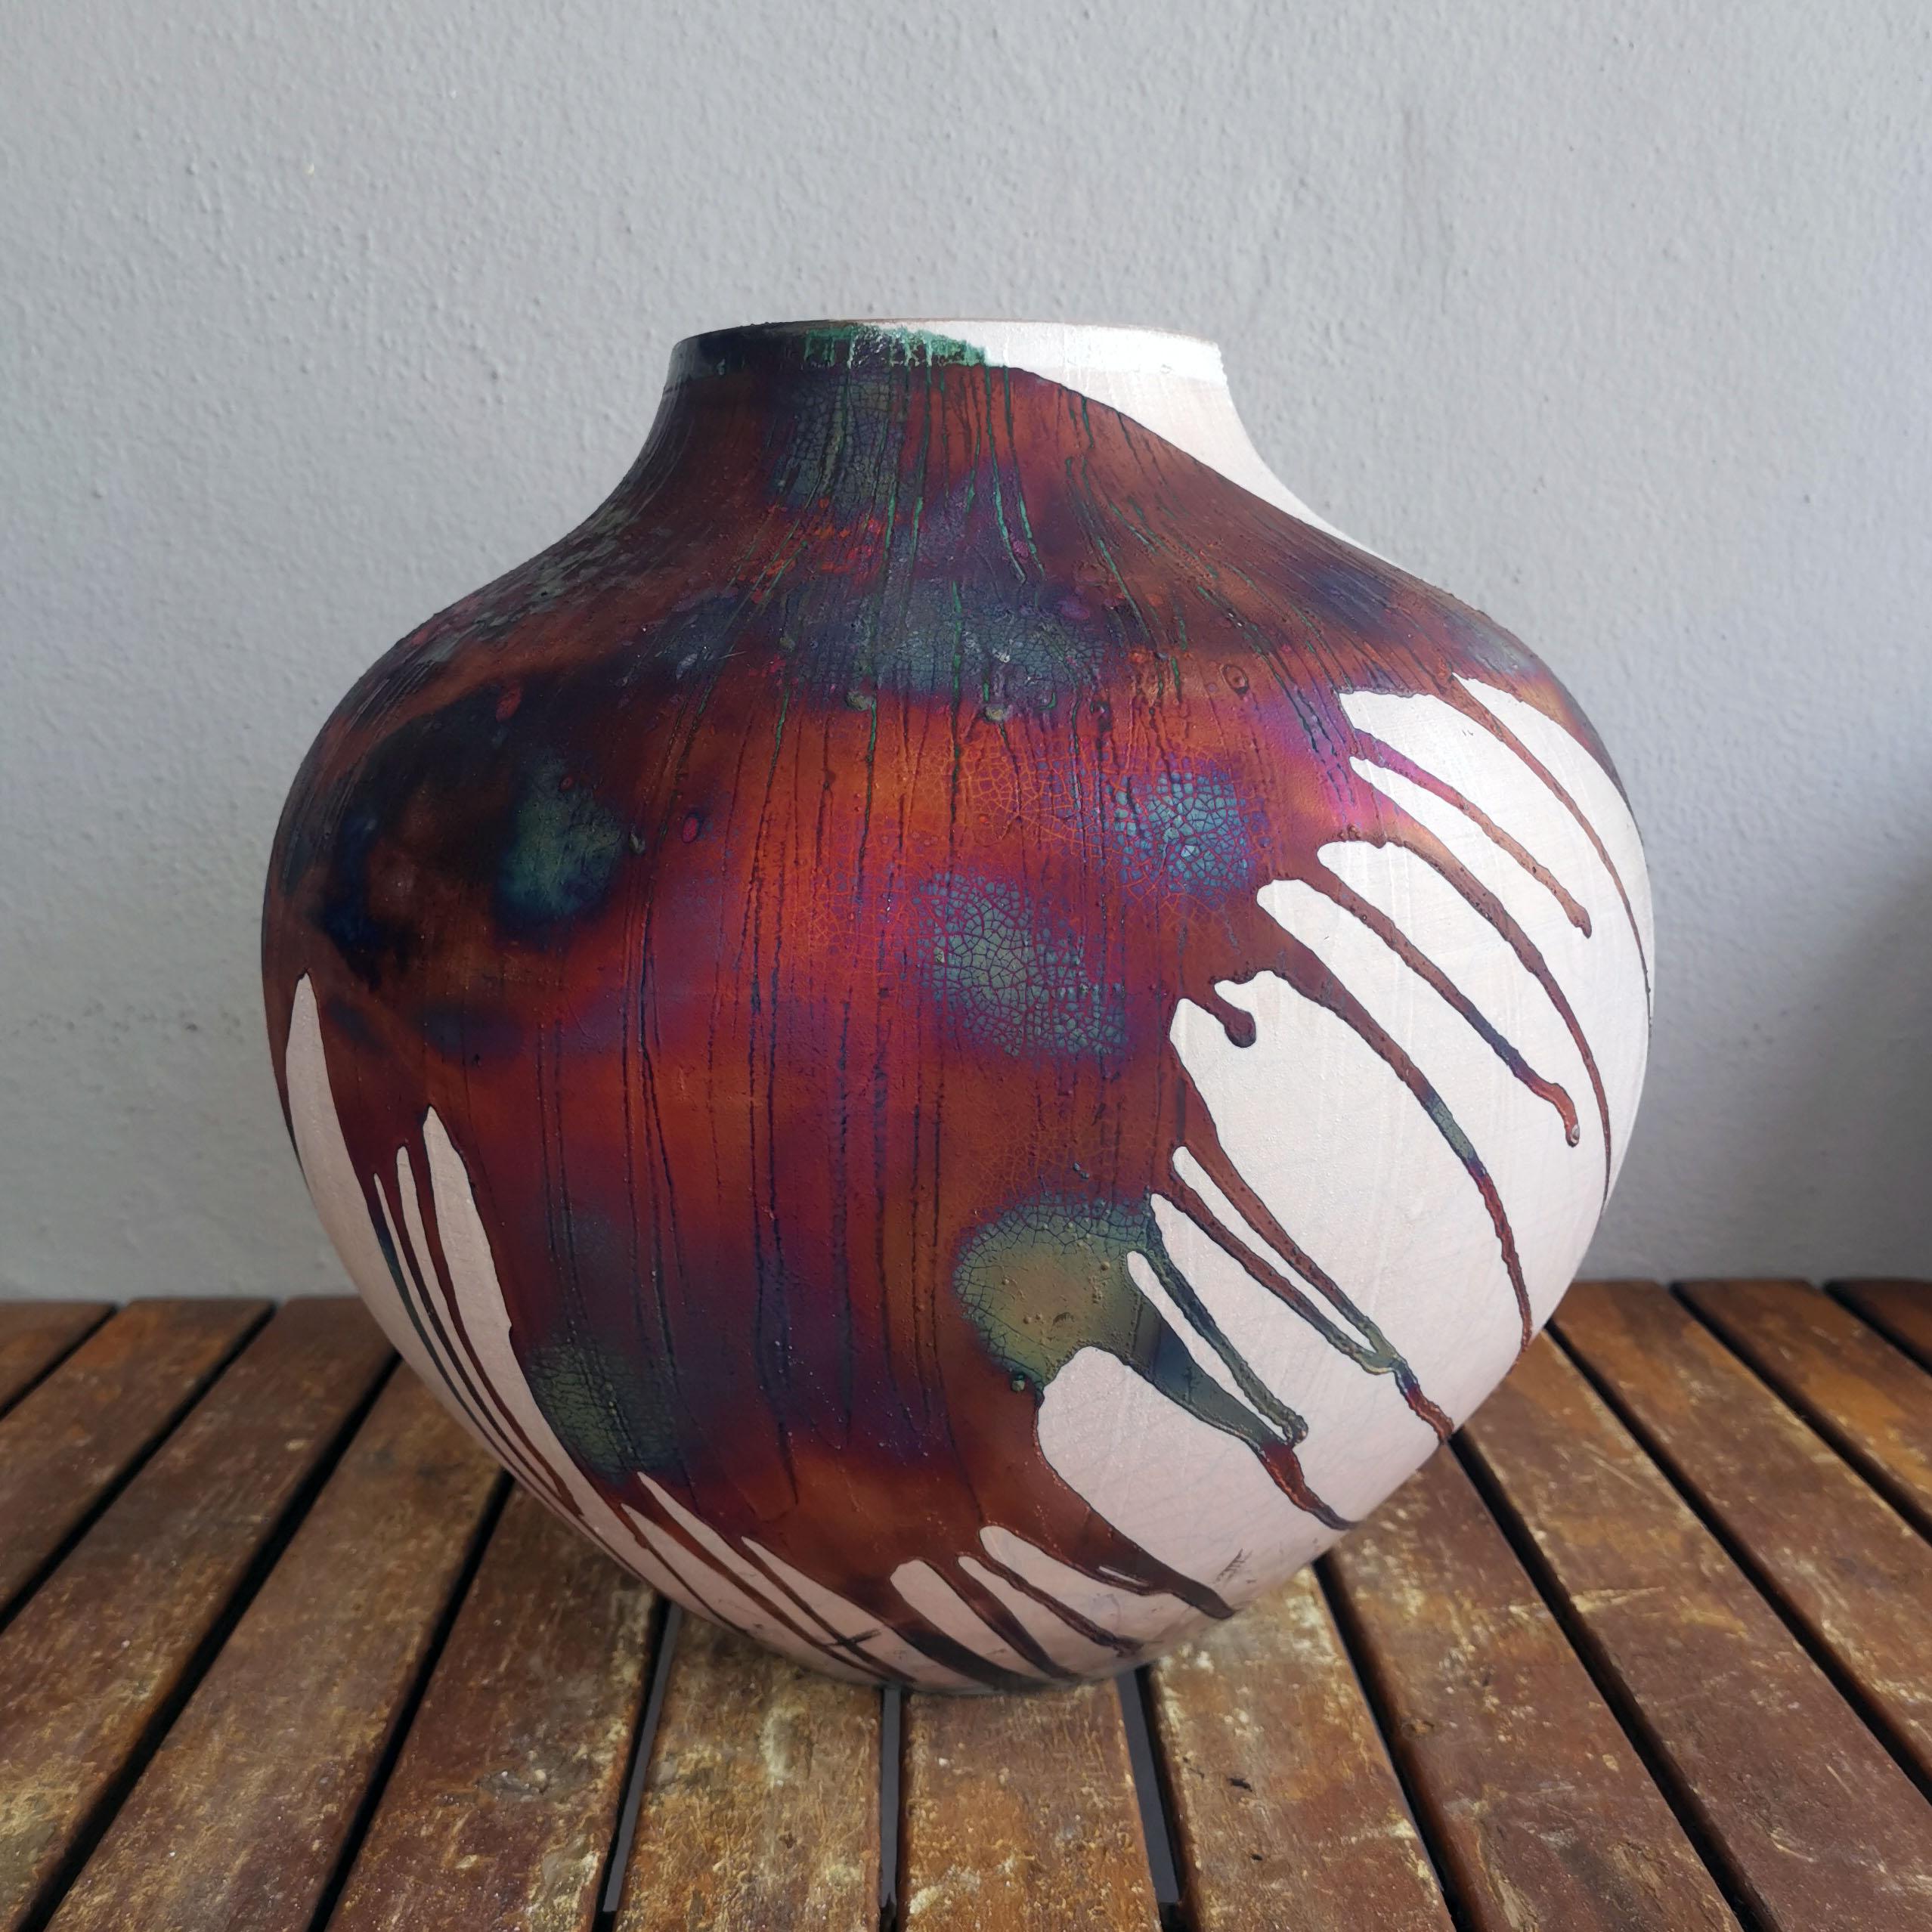 Pre-Order ~ Issho ~ Together

A mesmerizing sight to behold as soon as the rainbow-like patinas catch your eye. The Issho Vase is a wide Art Series vase that represents the spirit of togetherness. Togetherness in life across all aspects of human